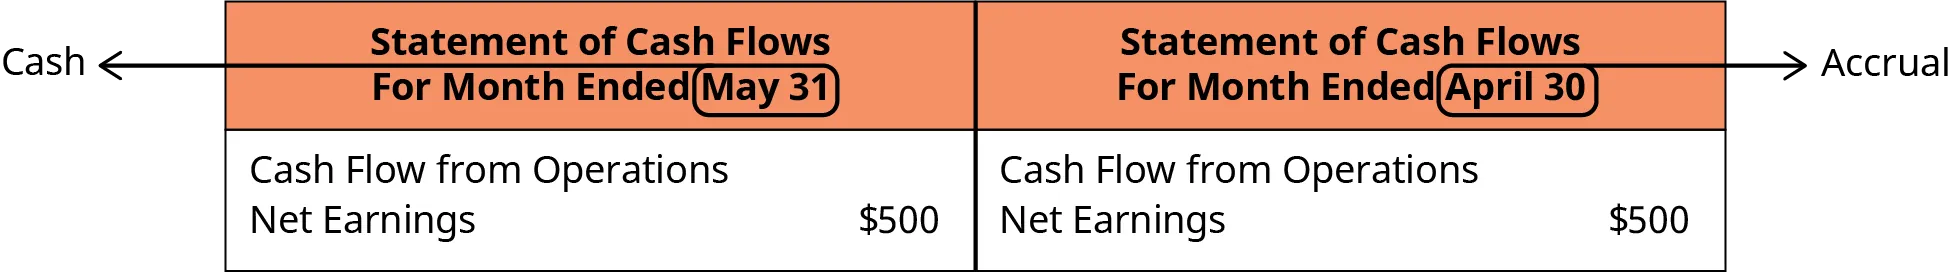 A simple depiction of credit versus cash. On the left side, the statement of cash flows for the month ended May 31 shows cash flow from operations net earnings of $500 as cash. On the right side, the statement of cash flows for the month ended April 30 shows cash flow from operations net earnings of $500 as an accrual.